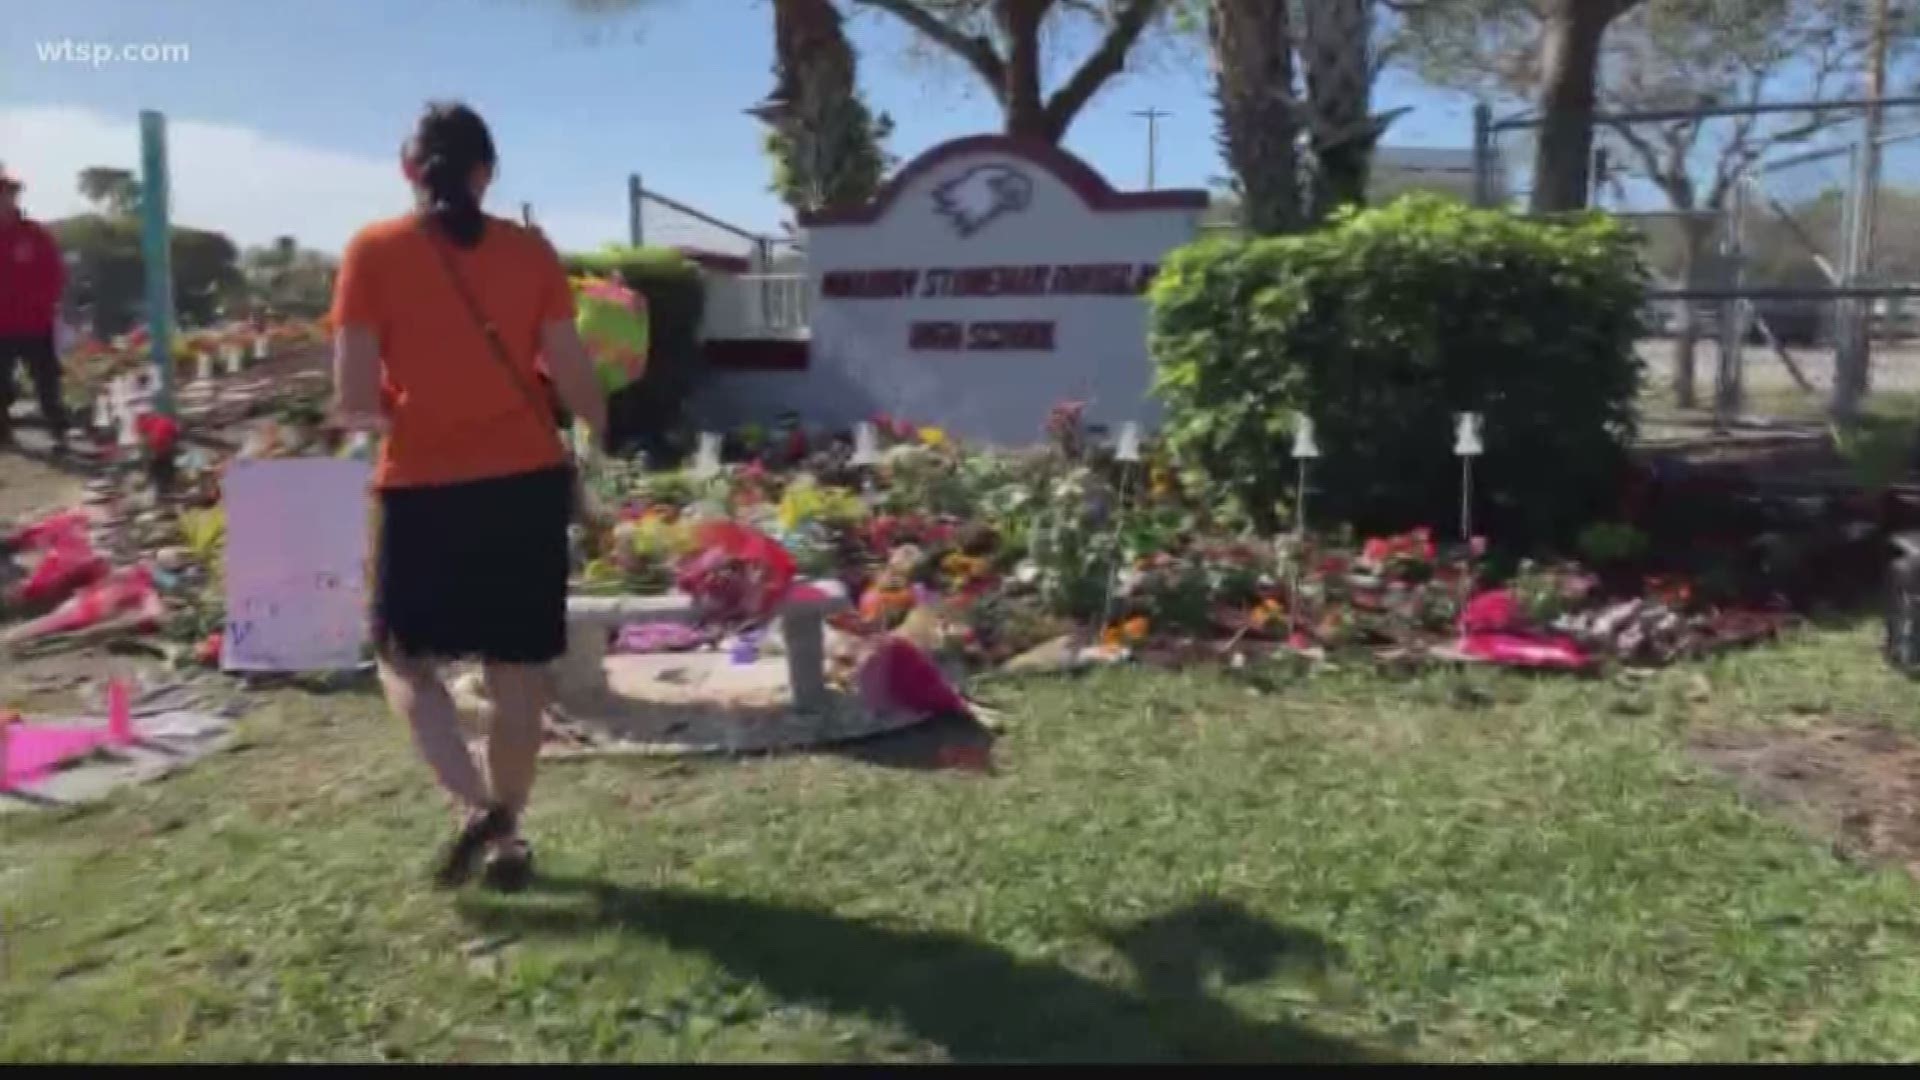 A year after the deadly school shooting in Parkland, students went to a half day at school and then took part in service projects to honor those who were lost.